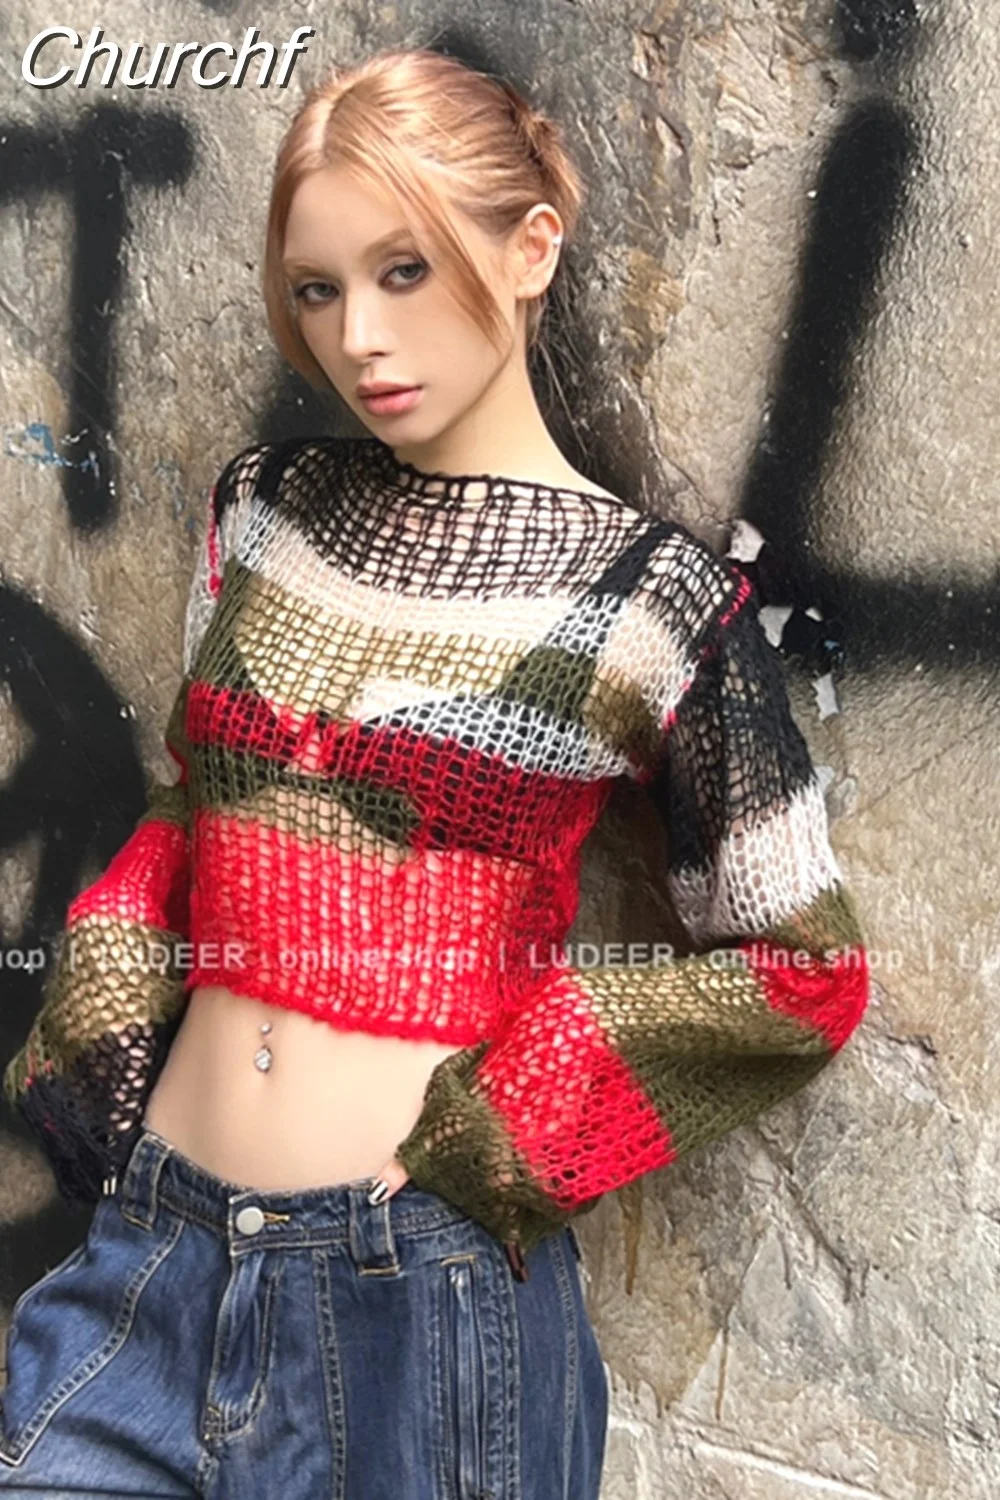 Churchf Y2K Vintage Oversized Sweater Women Harajuku Grunge Hollow Out Knitted Pullover Fashion Backless Crop Tops Jumper 2000s